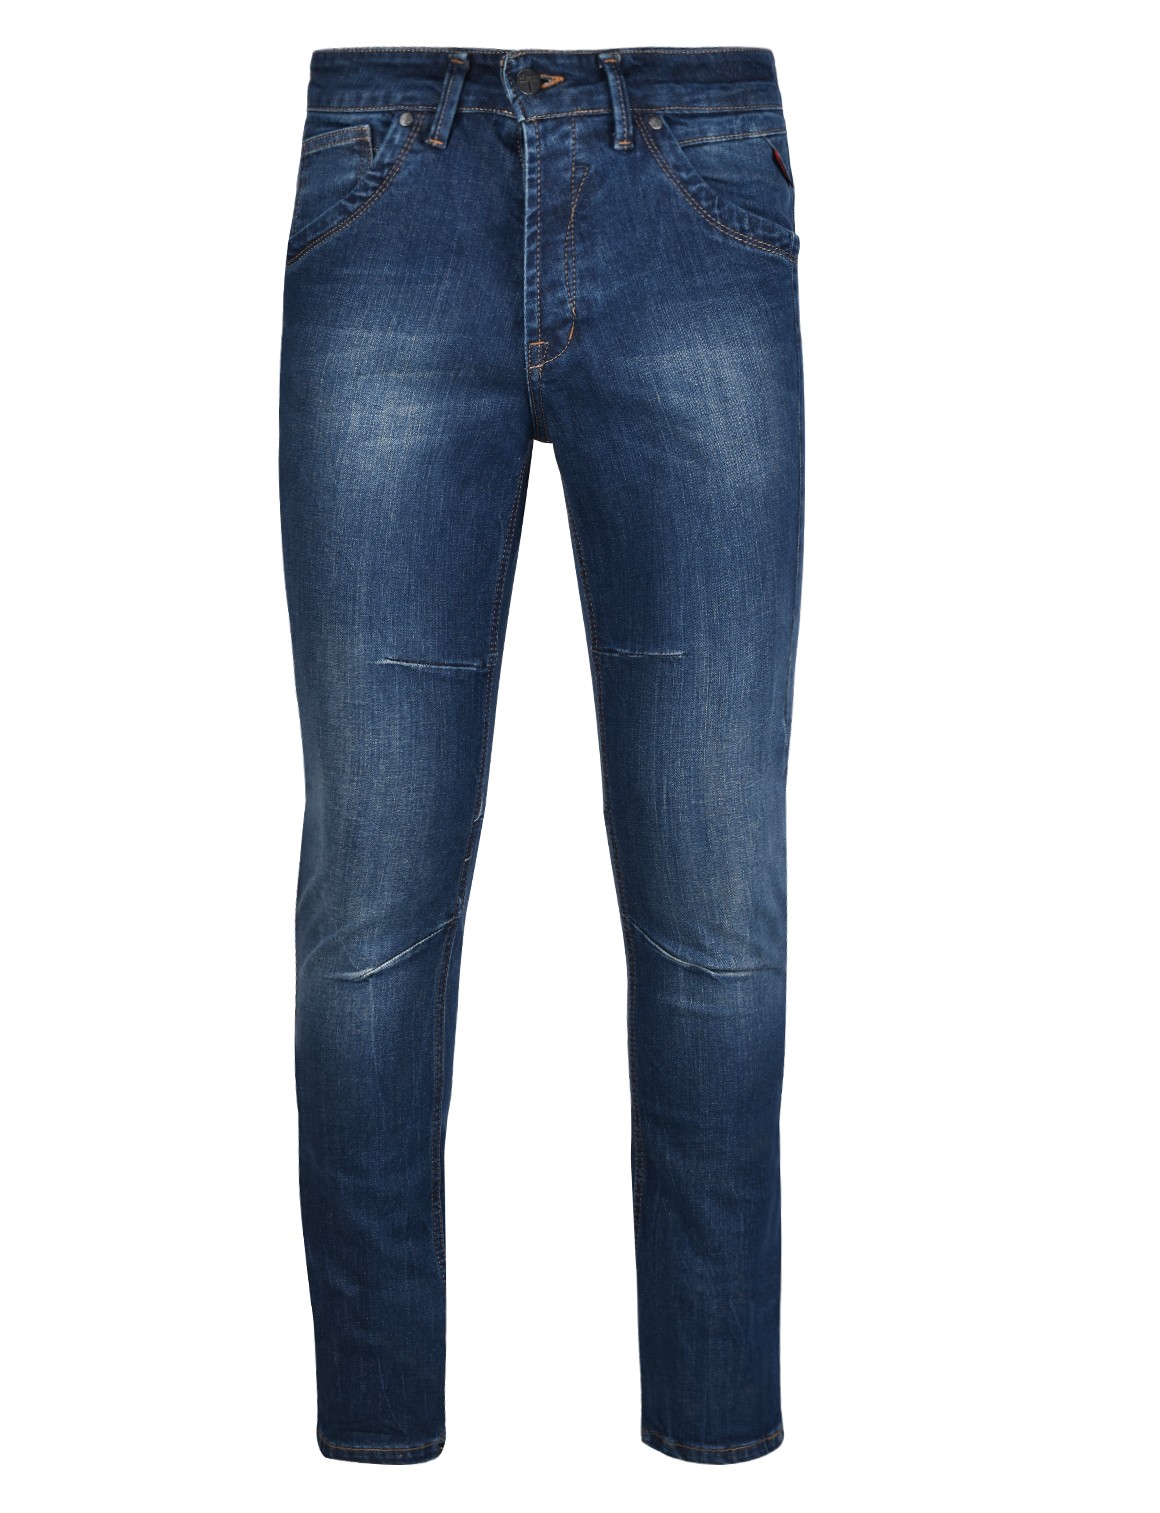 RED JEANS Scar Blue Skinny Fit